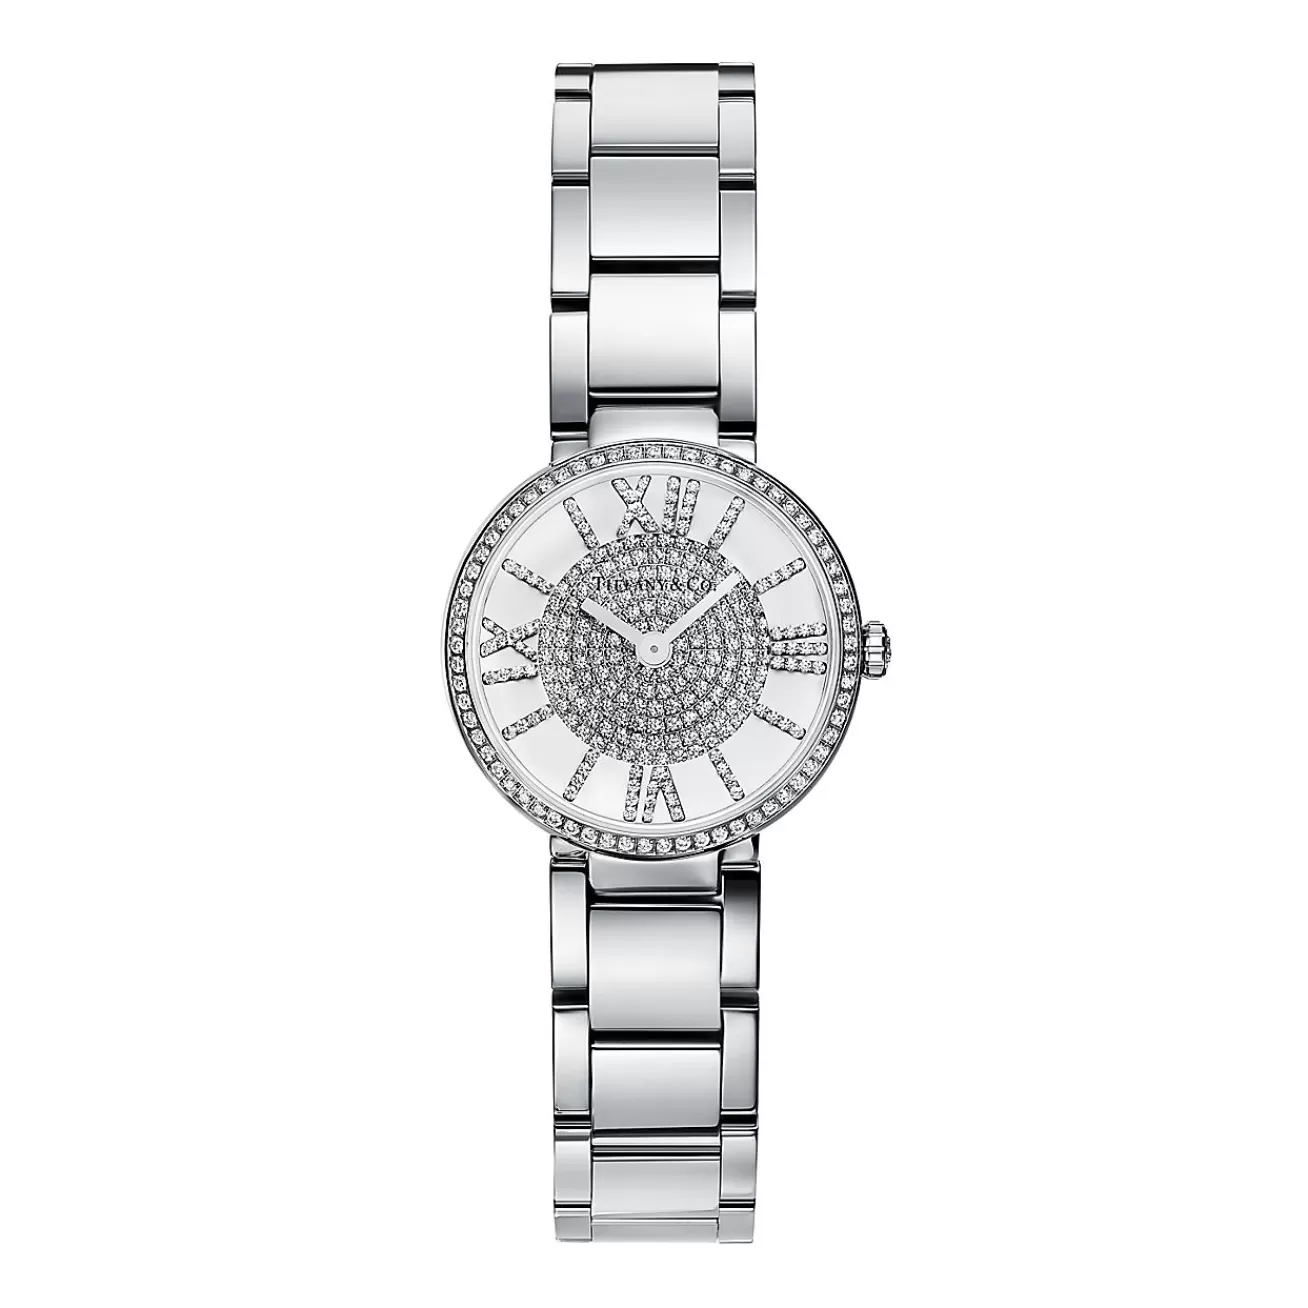 Tiffany & Co. Atlas® 24 mm watch in stainless steel with diamonds and a pavé diamond dial. | ^Women Fine Watches | Women’s Watches